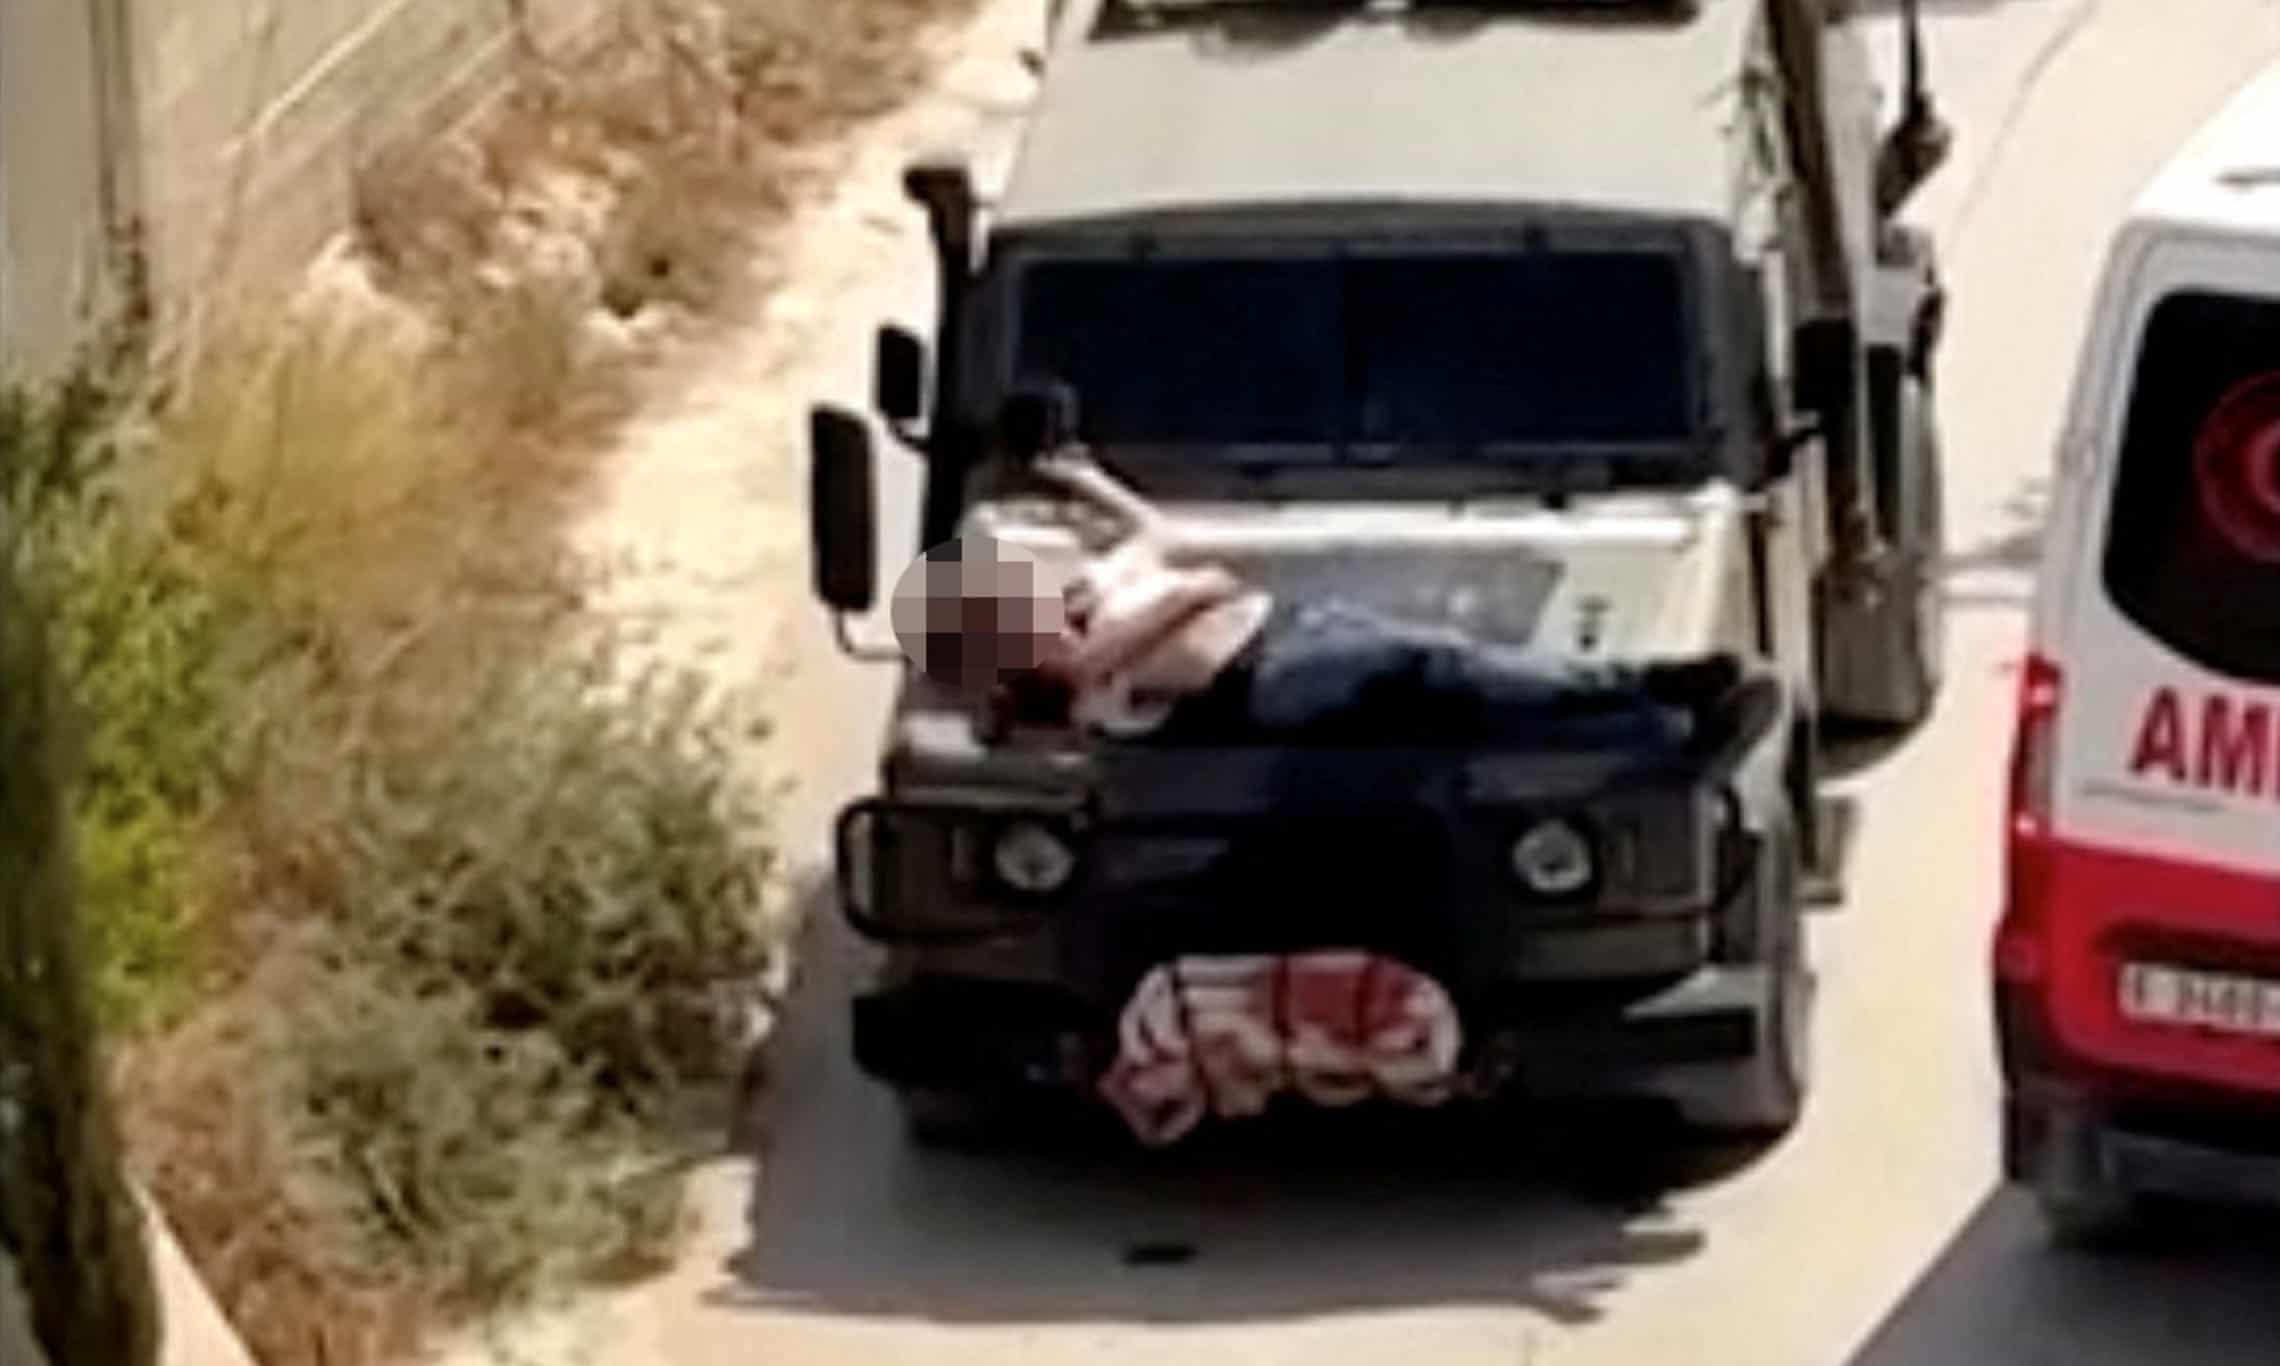 Wounded Palestinian strapped to IDF jeep